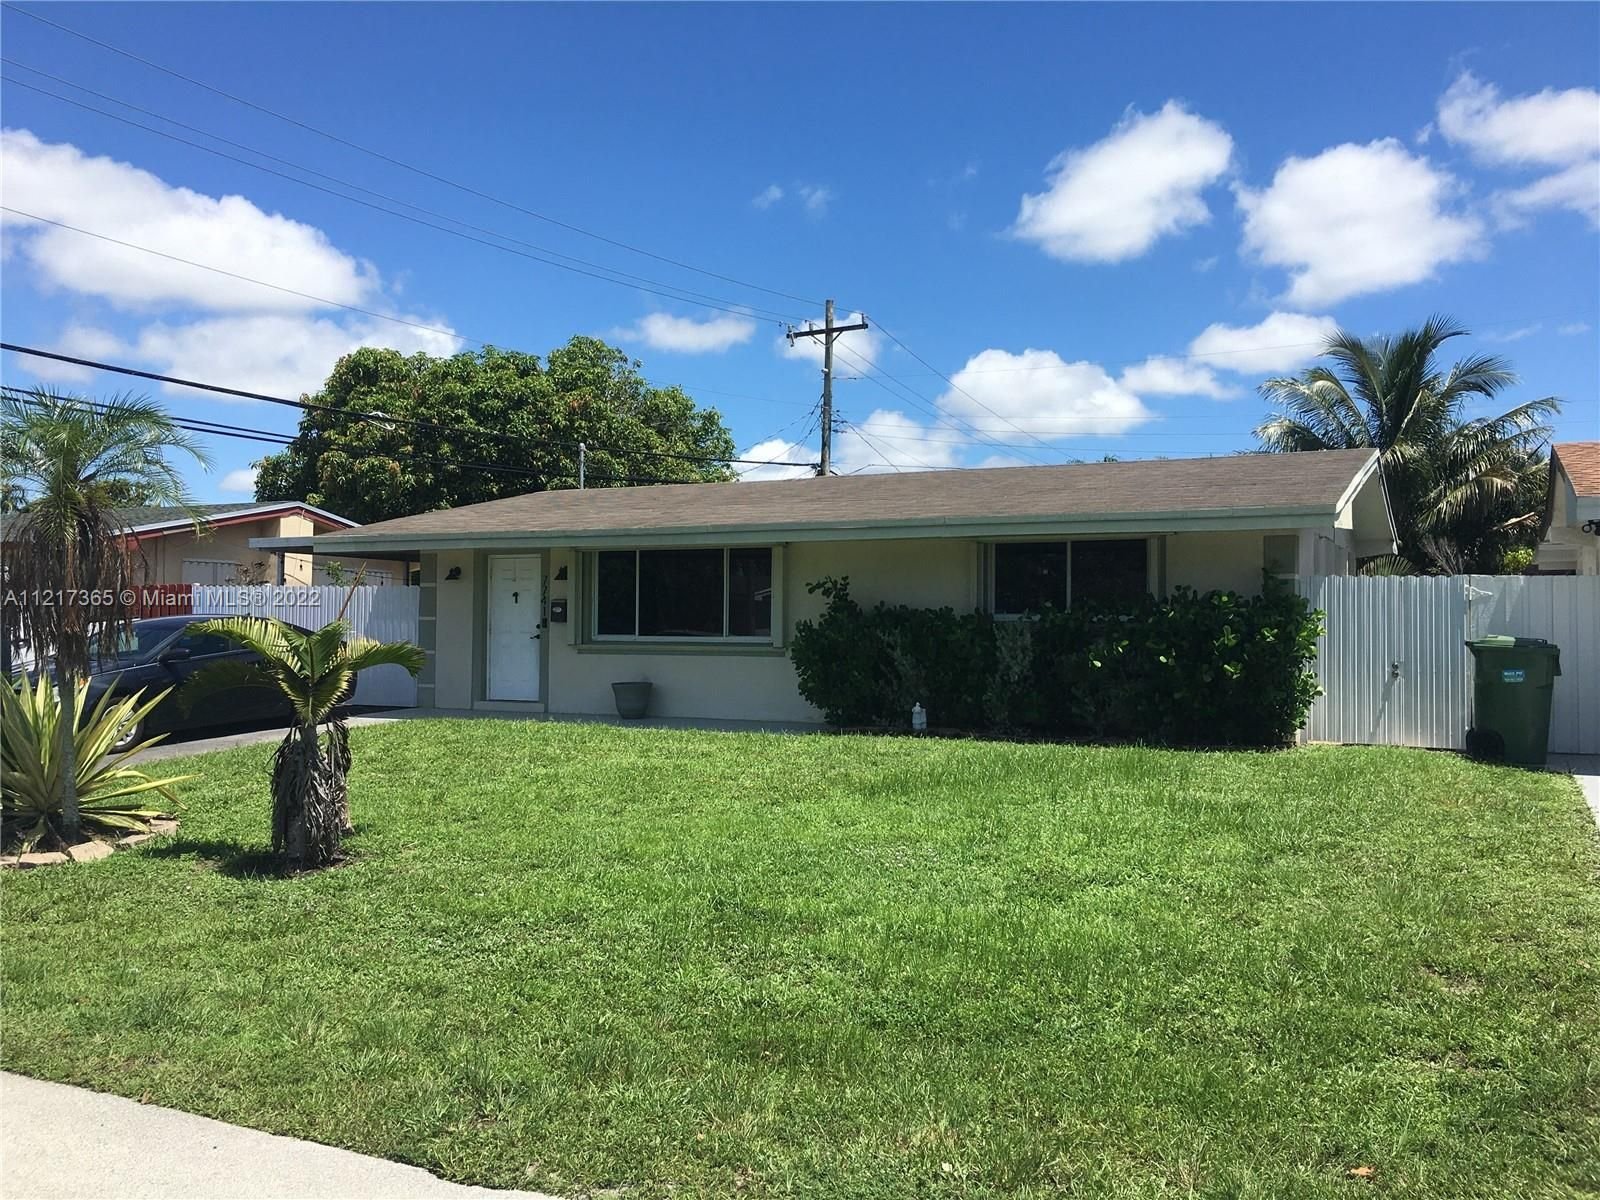 Real estate property located at 7741 11th St, Broward County, Pembroke Pines, FL